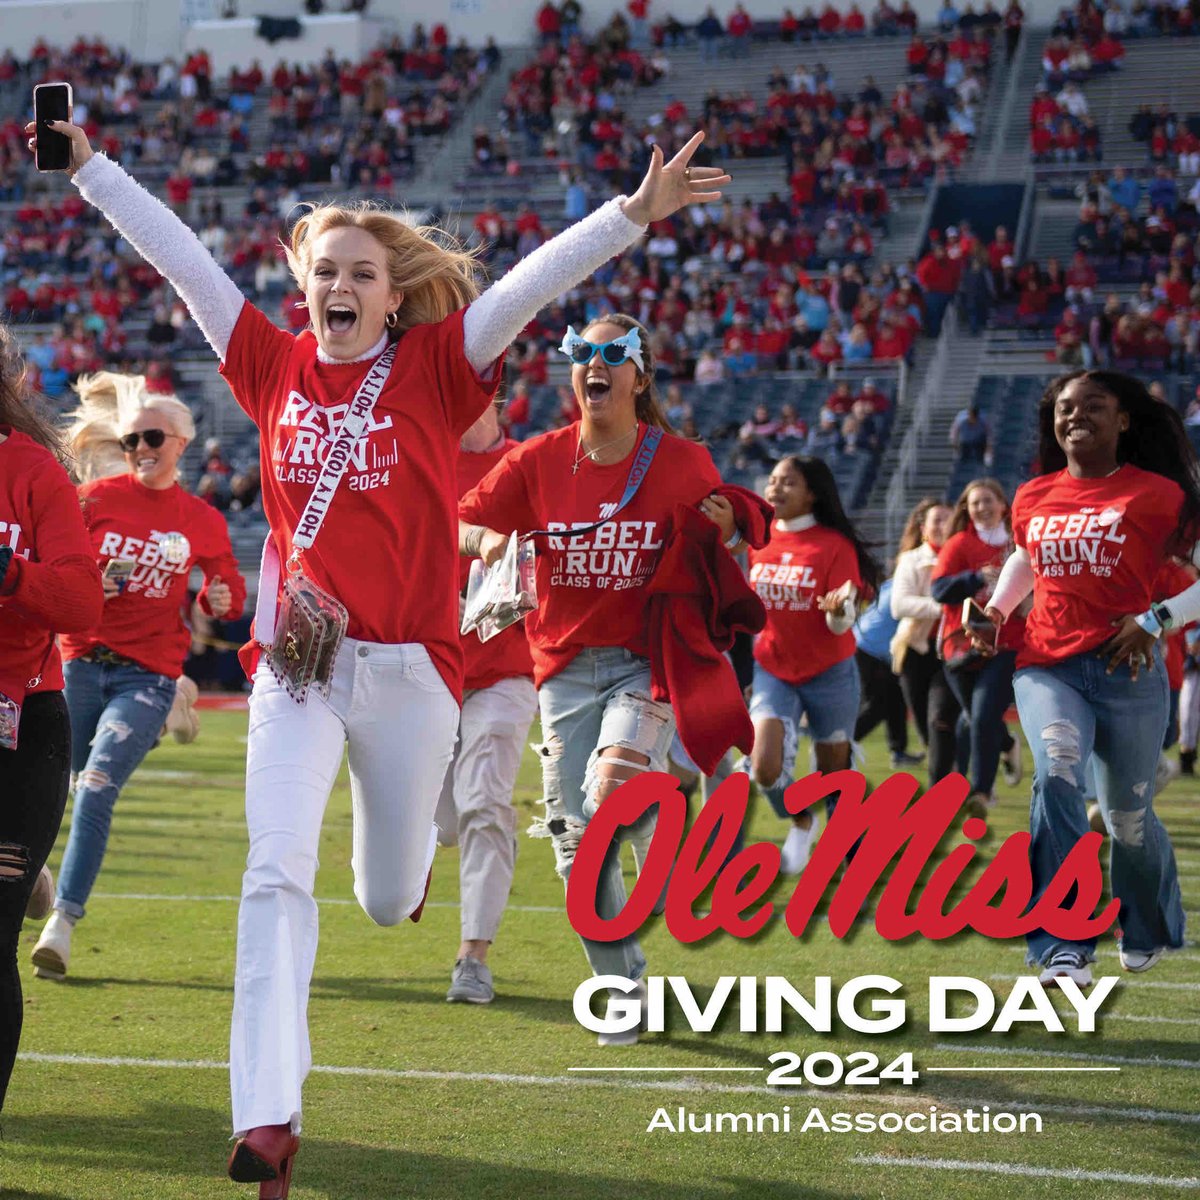 🔴🔵 𝗢𝗟𝗘 𝗠𝗜𝗦𝗦 𝗚𝗜𝗩𝗜𝗡𝗚 𝗗𝗔𝗬 𝗜𝗦 🔛! Help us make #OleMissGivingDay a success by funding student scholarships, contributing to the Triplett Alumni Center Building Project Fund & more! 𝗚𝗜𝗩𝗘 𝗧𝗢𝗗𝗔𝗬: bit.ly/GivingDayOMAA